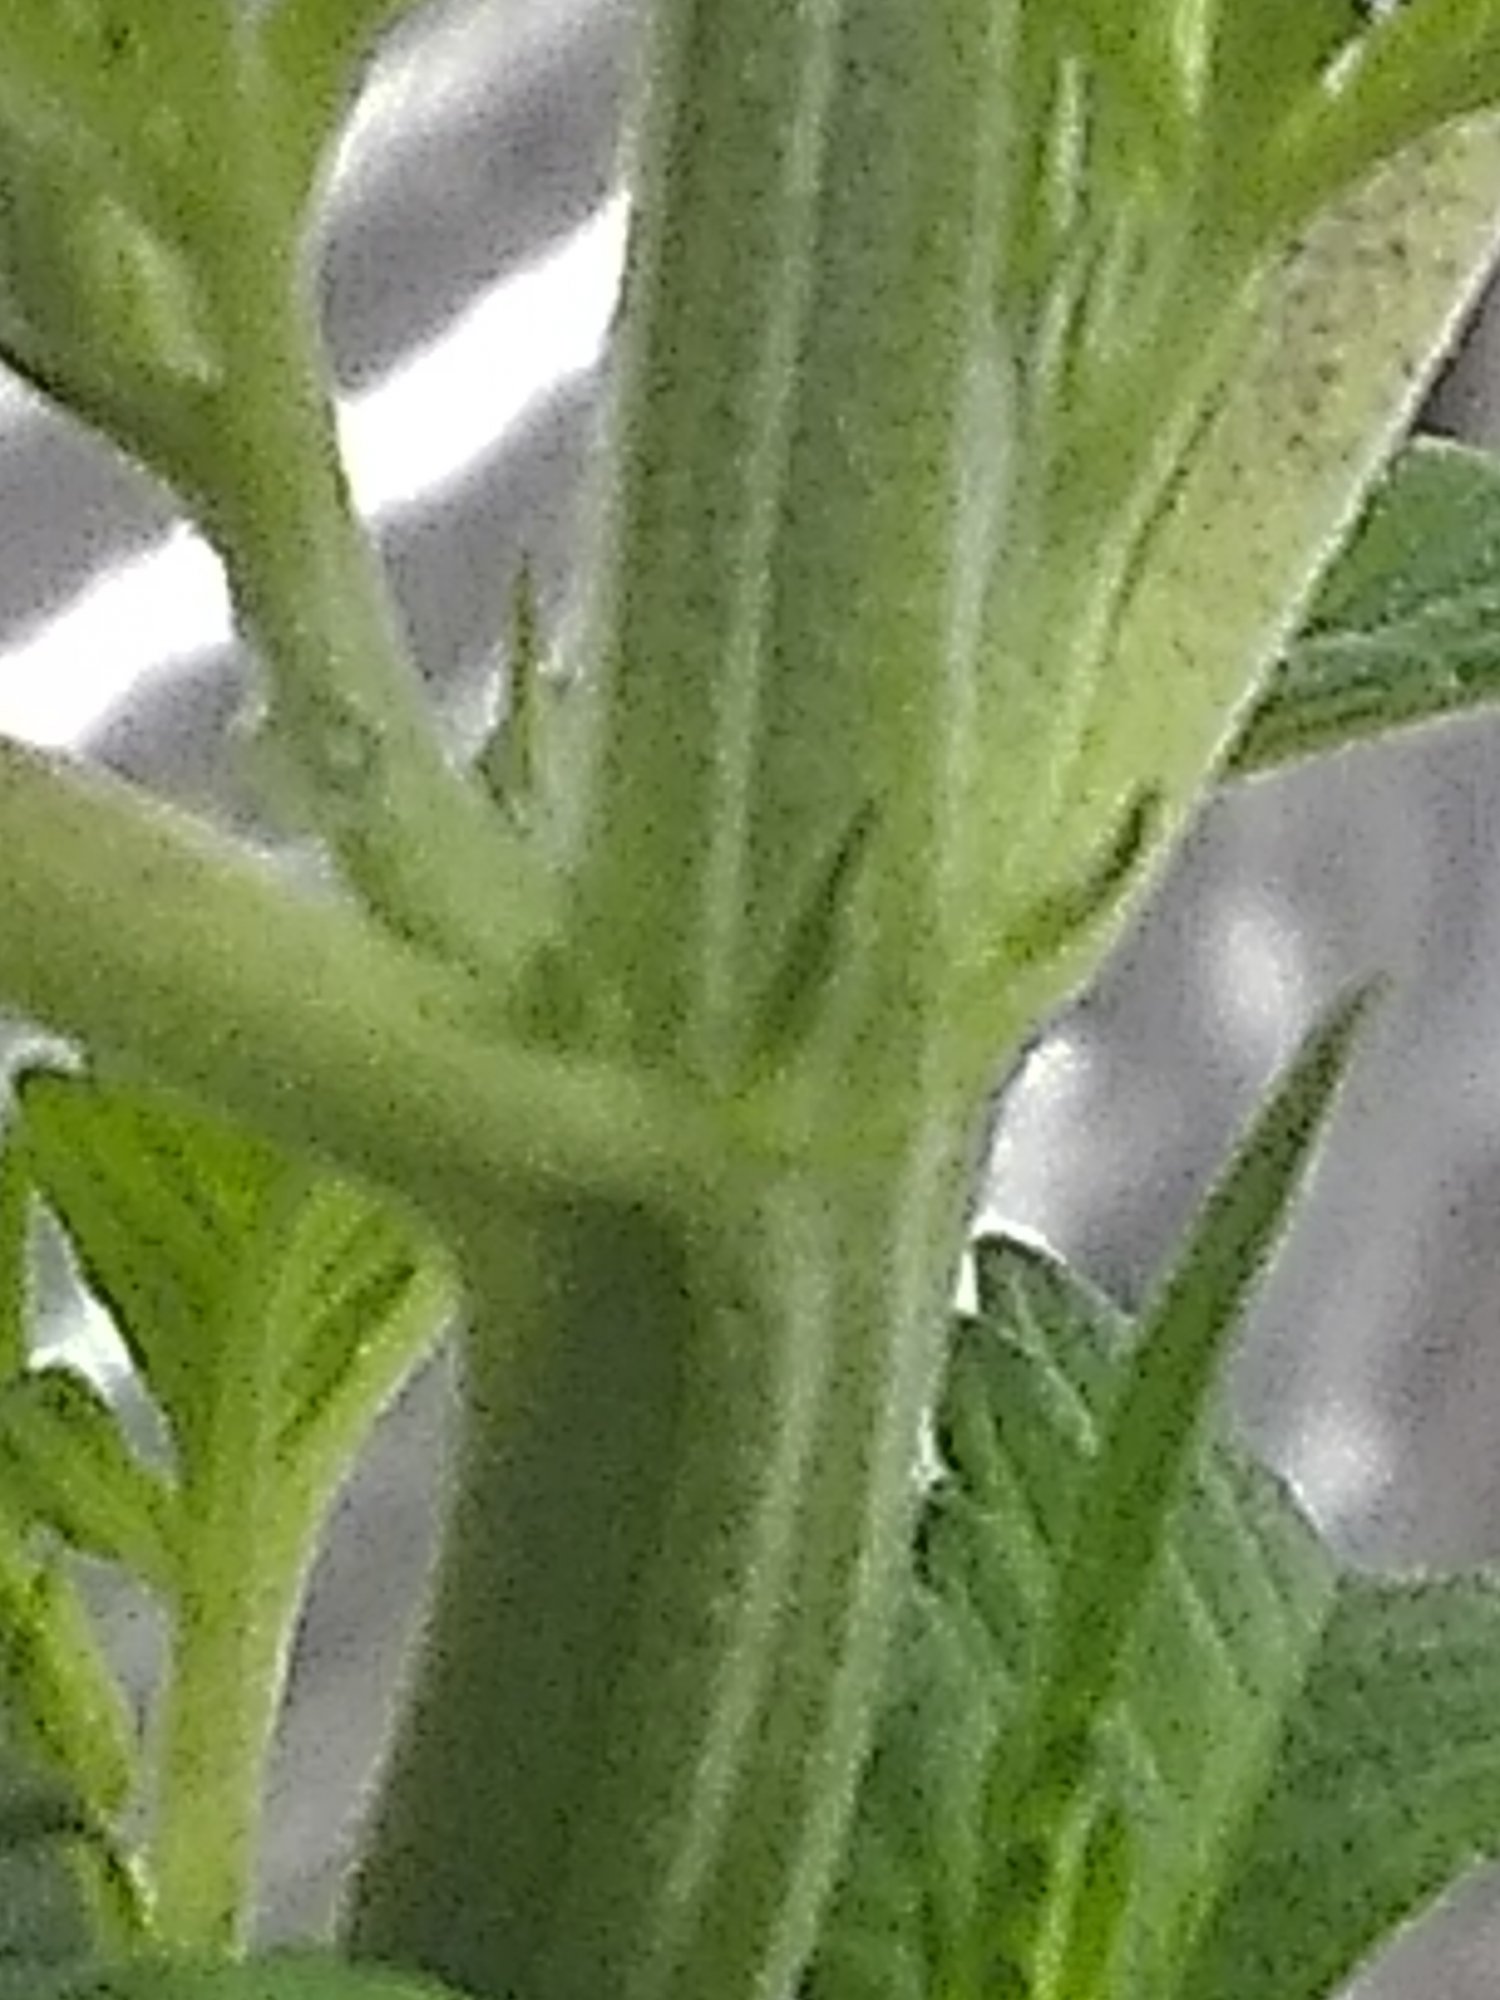 Is this plant starting to show sex